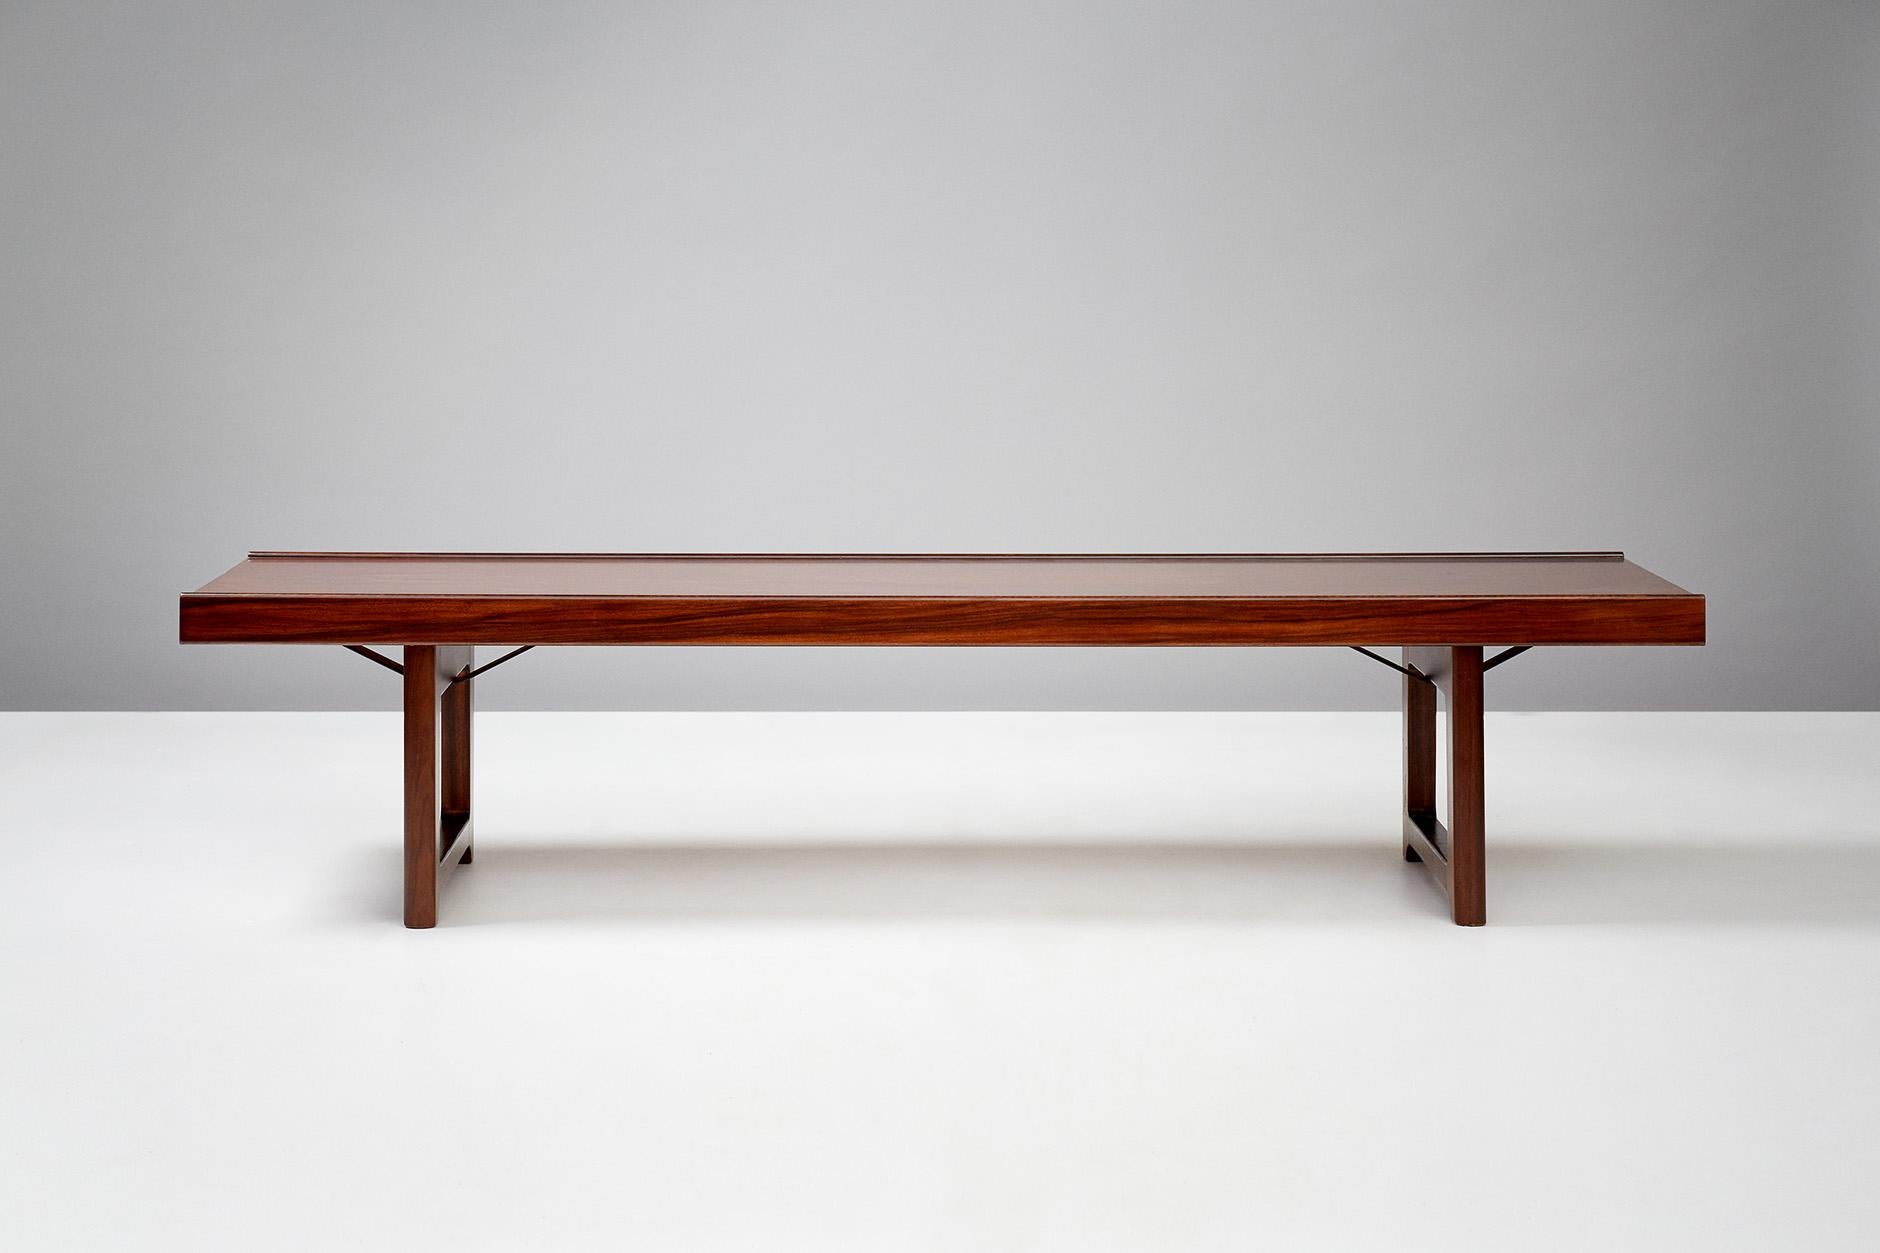 Torbjorn Afdal

Rosewood afromosia teak bench, circa 1960

Multipurpose bench from Norwegian designer Torbjorn Afdal for Bruksbo. Can be used as a bench or low coffee table.